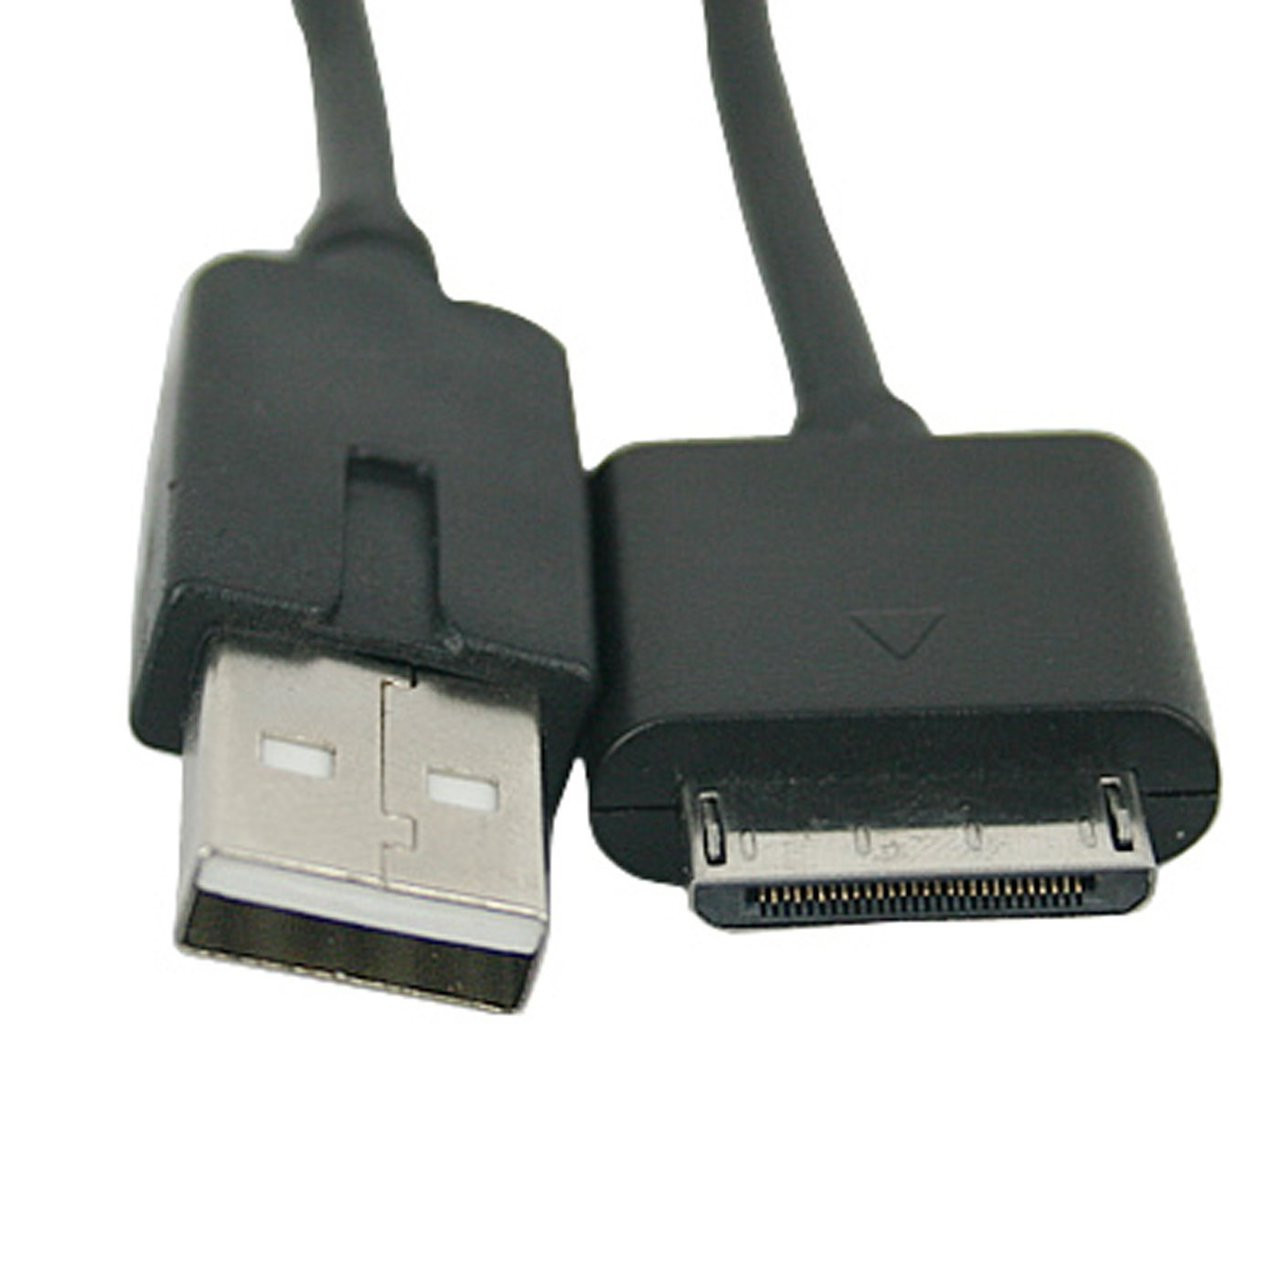 PSP-N430 98564 USB Data Charger Cable for Sony PSP GO